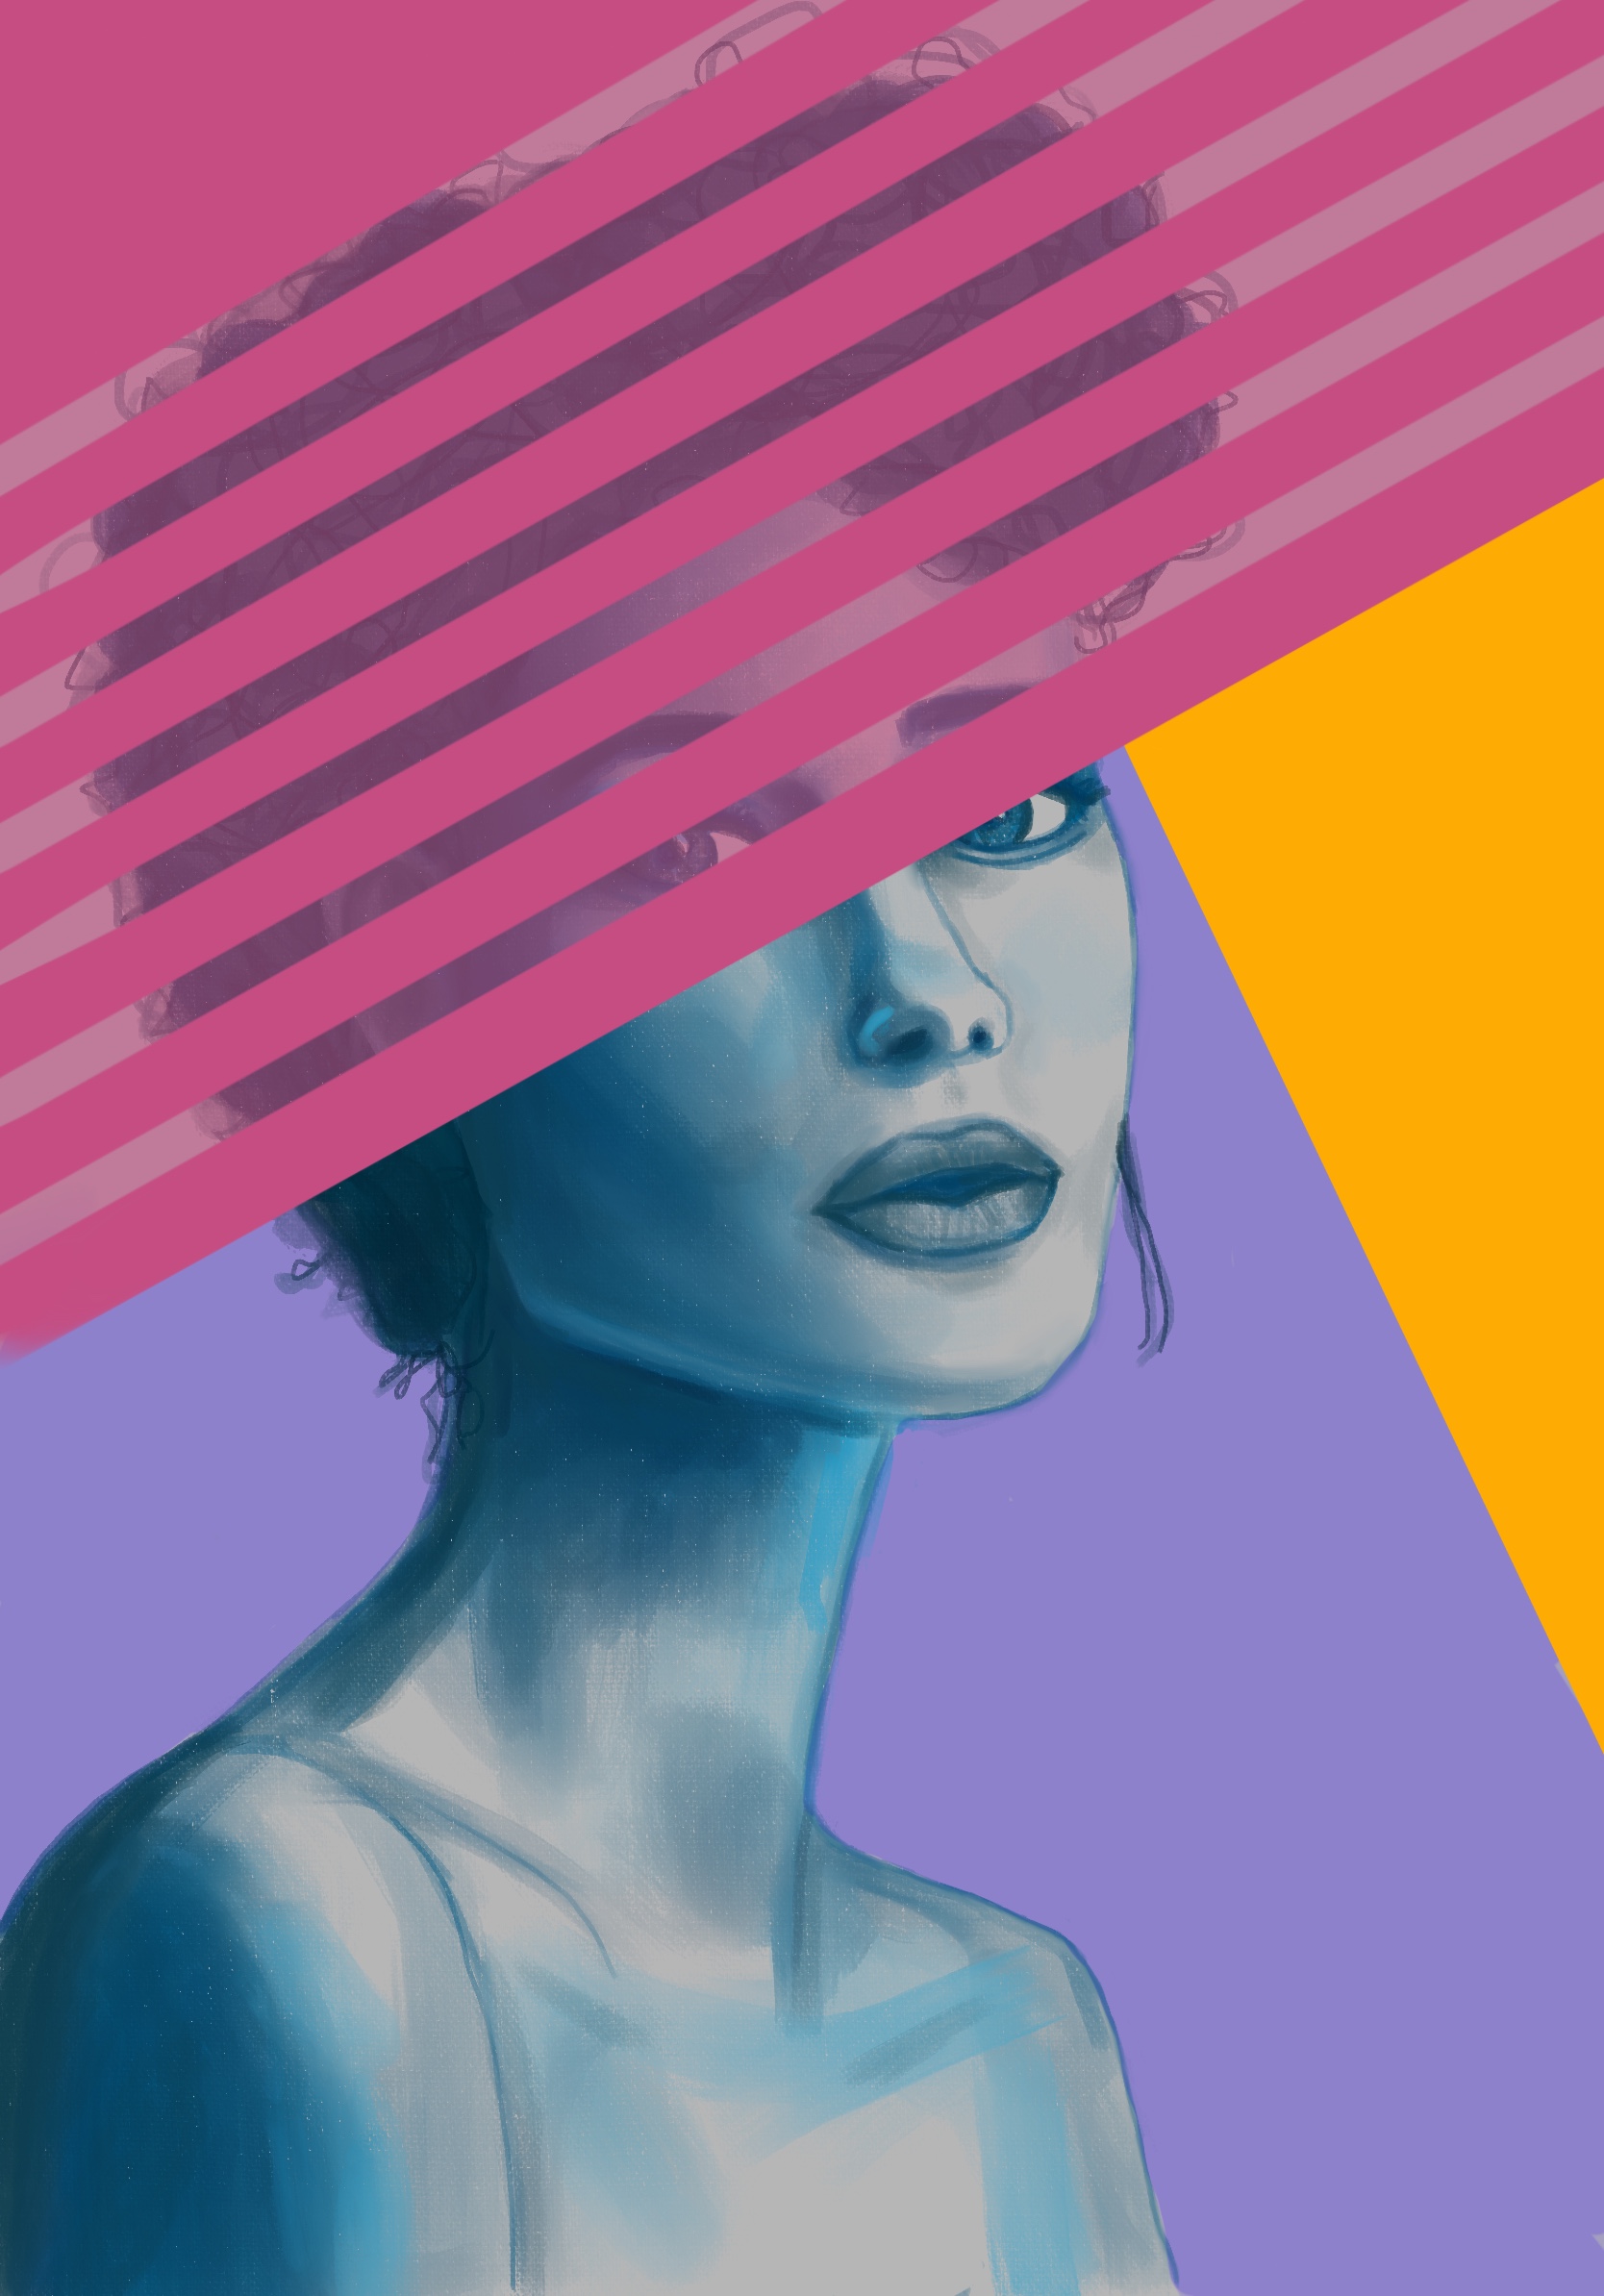 Shapes-and-colors-lady-digital-illustration